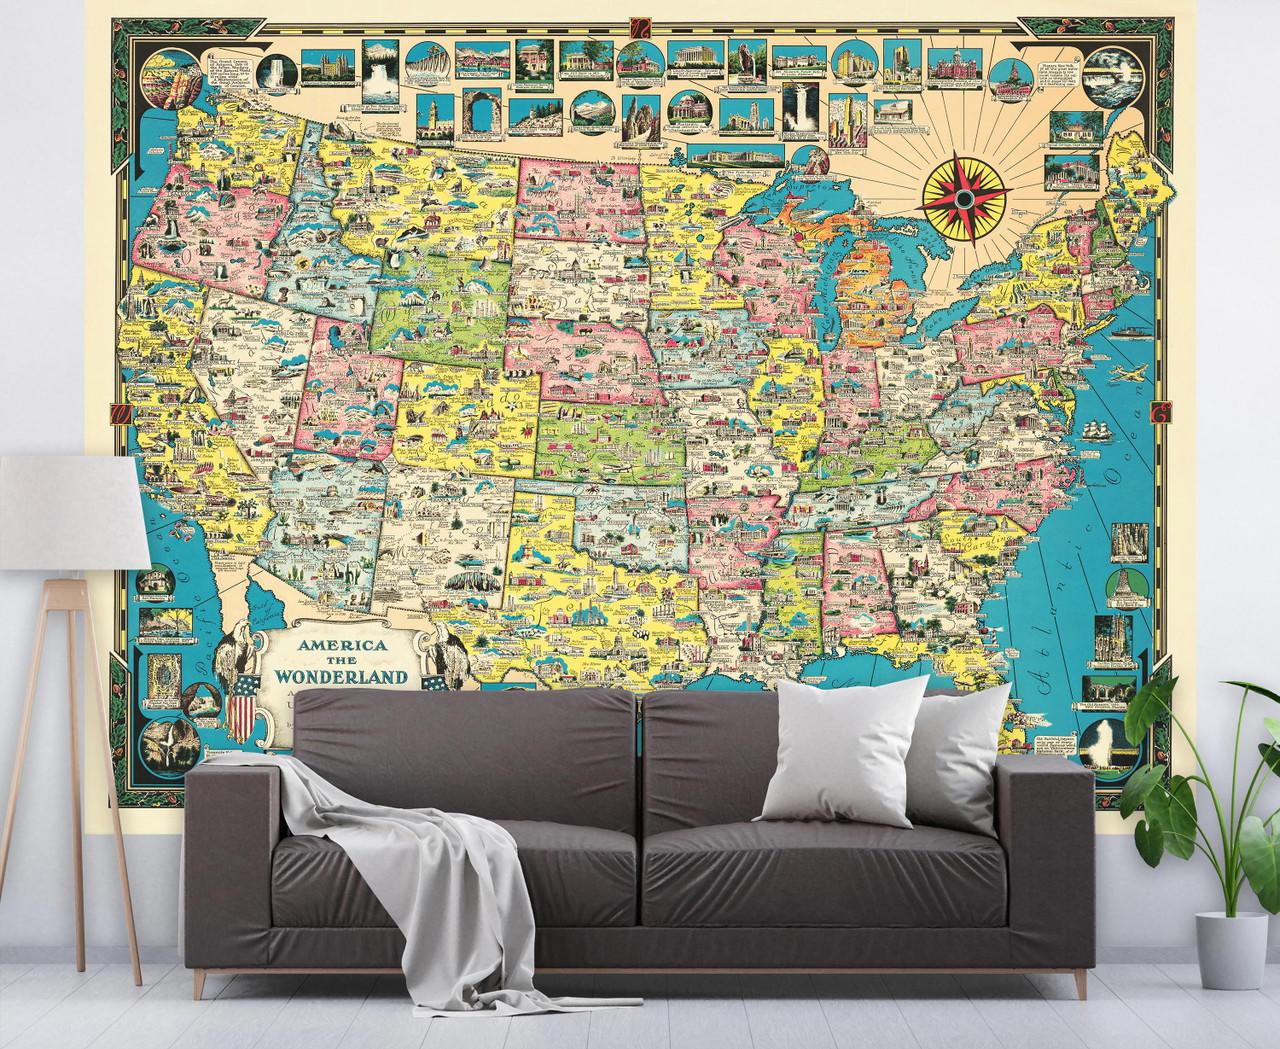 Vintage Usa Map Wall Mural Peel Stick World Maps Online